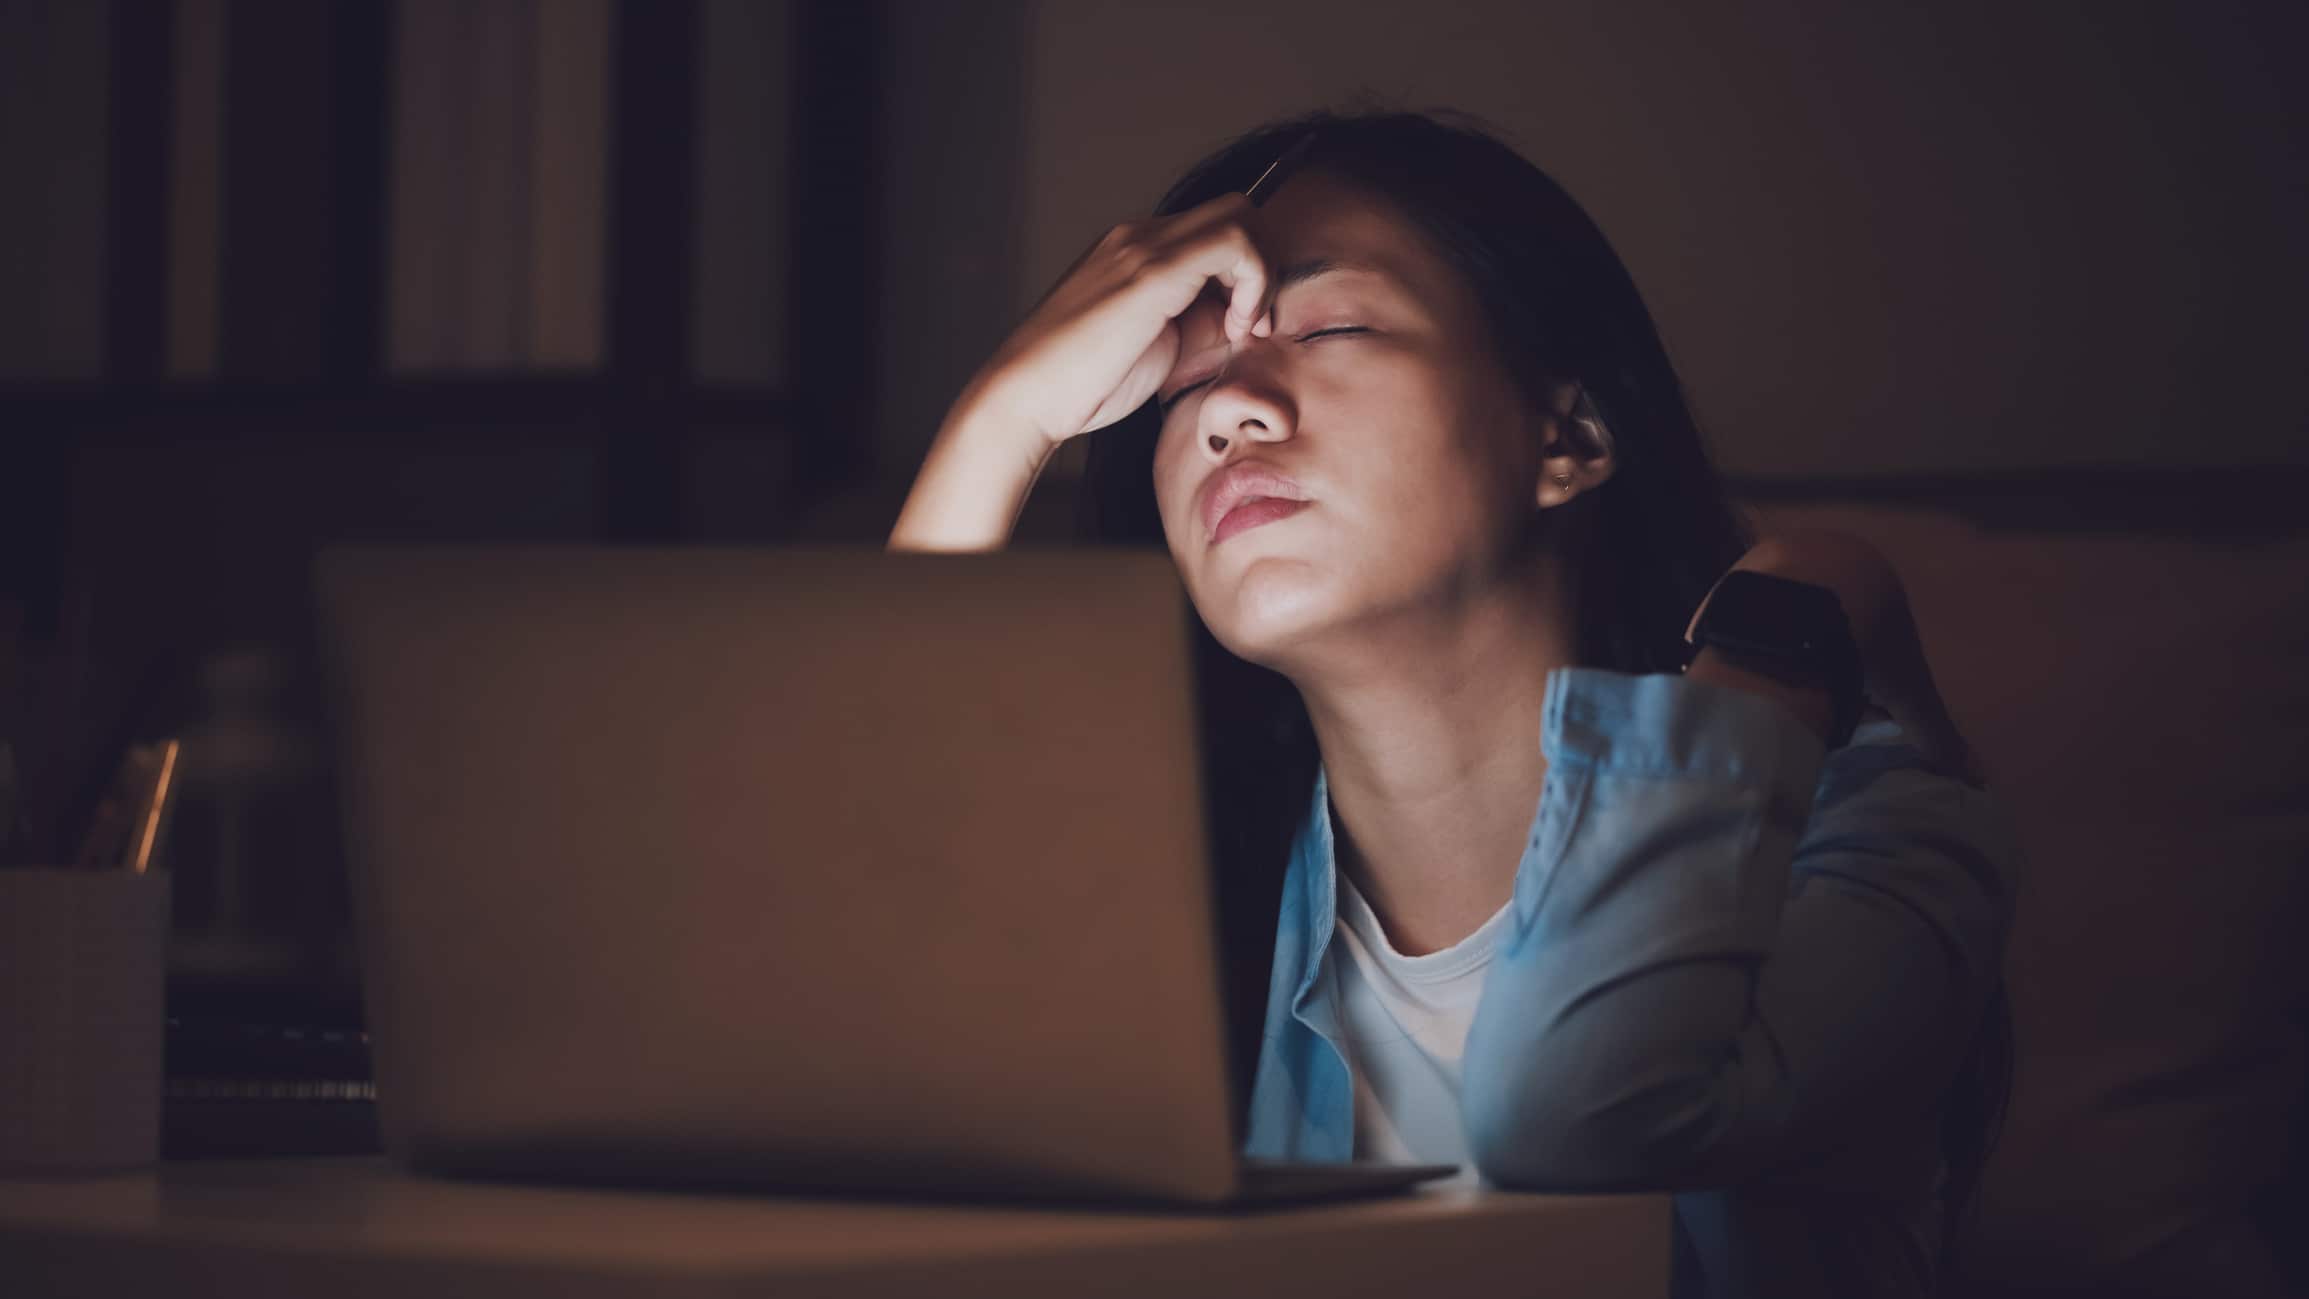 Asian woman student or businesswoman work late at night. Concentrated and feel sleepy at the desk in dark room with laptop or notebook. Concept of people workhard and burnout syndrome.